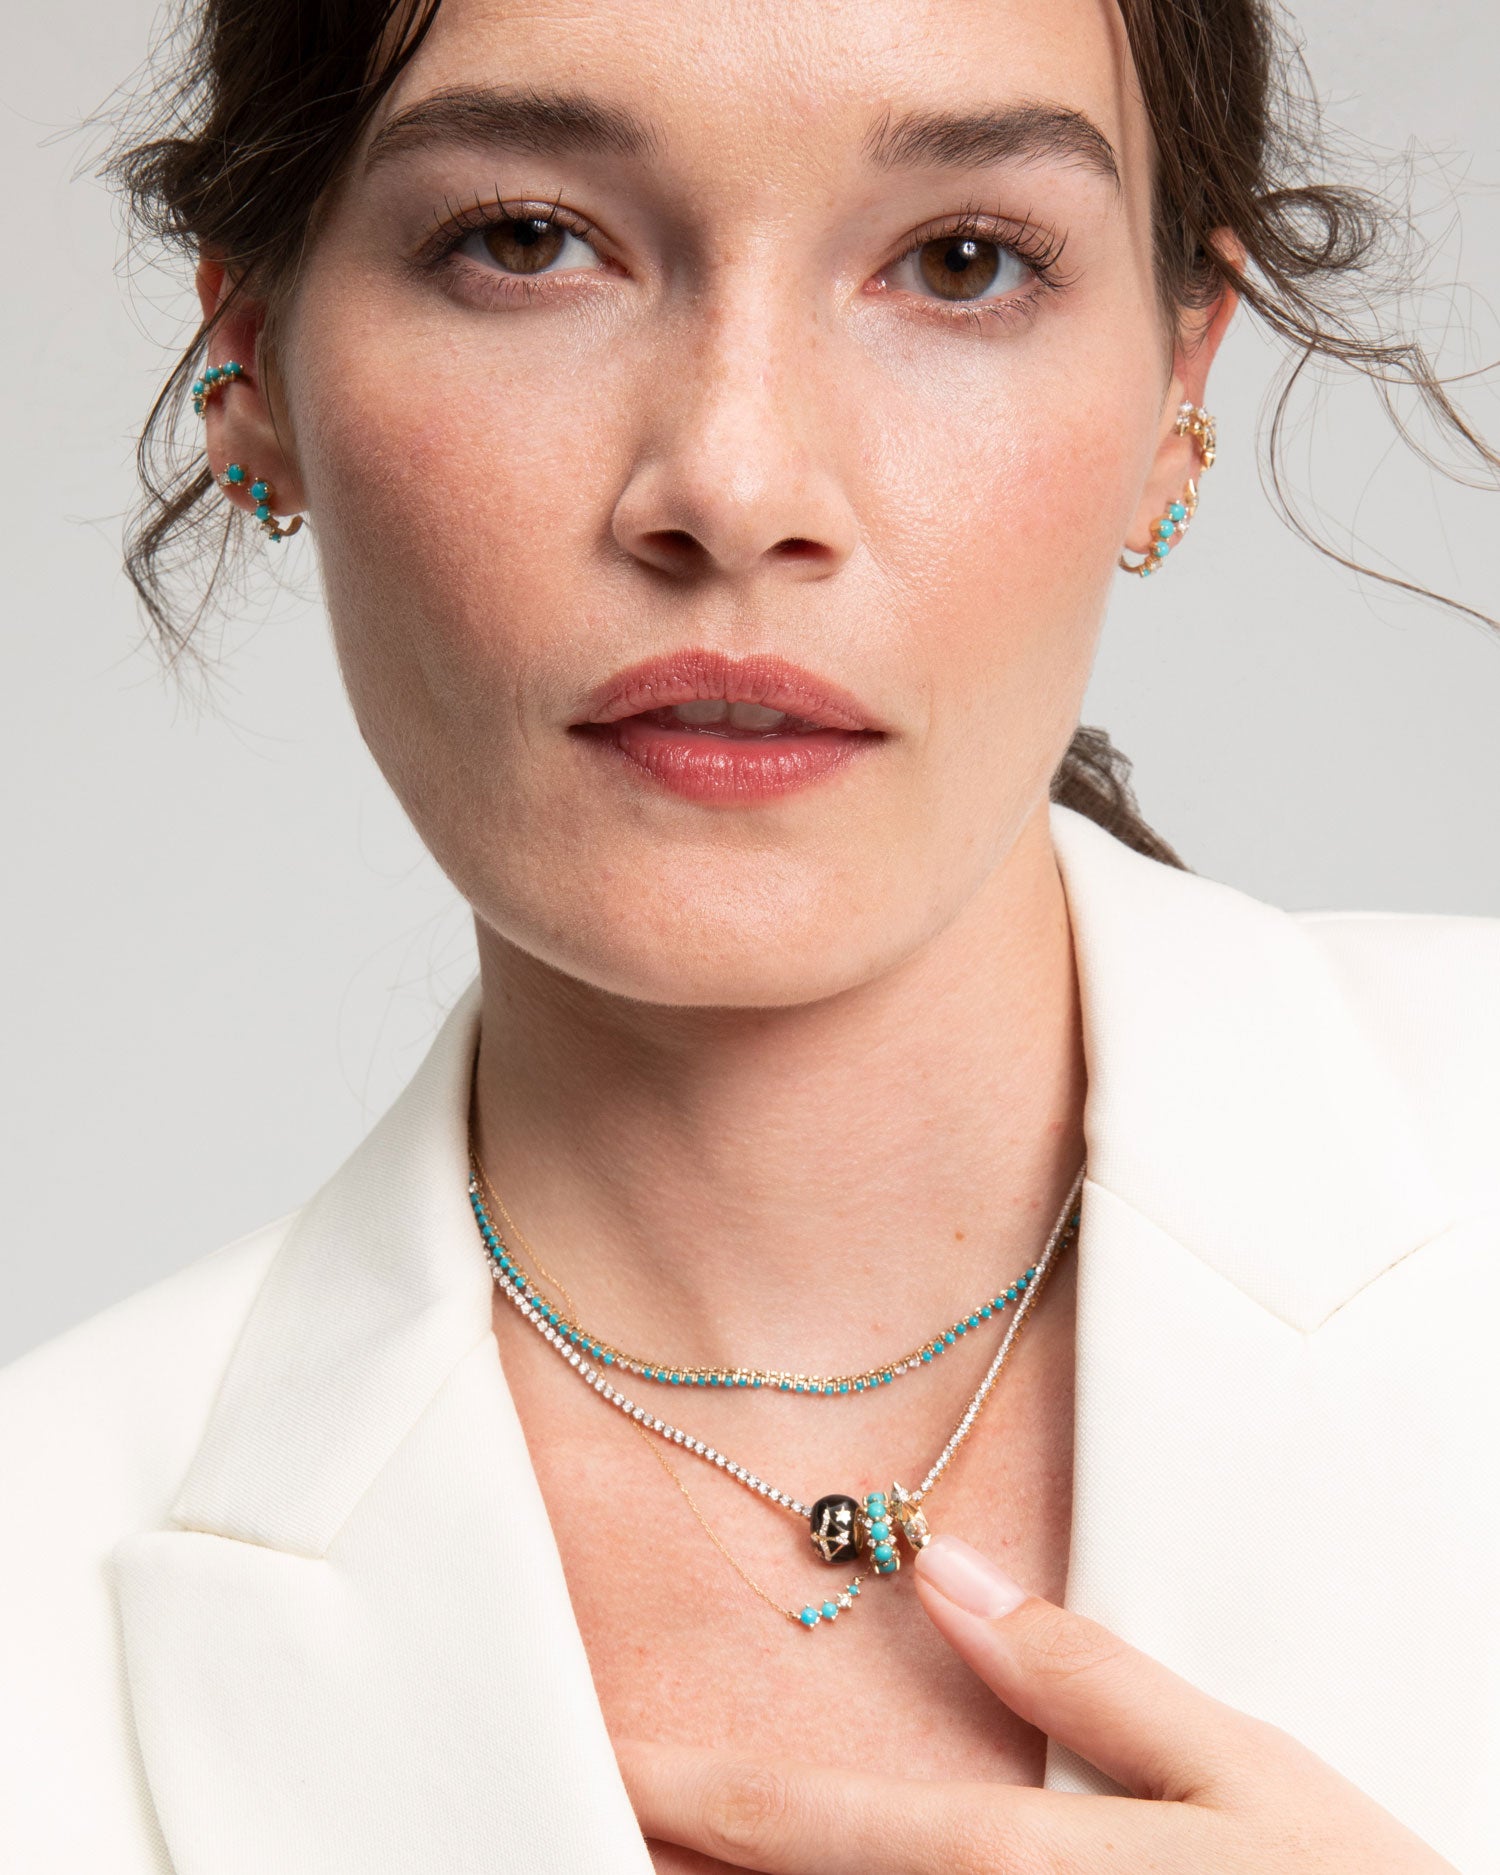 Model Wearing the Adina reyter Graduated Turquoise & Diamond Curve Necklace along with other adina reyter jewelry